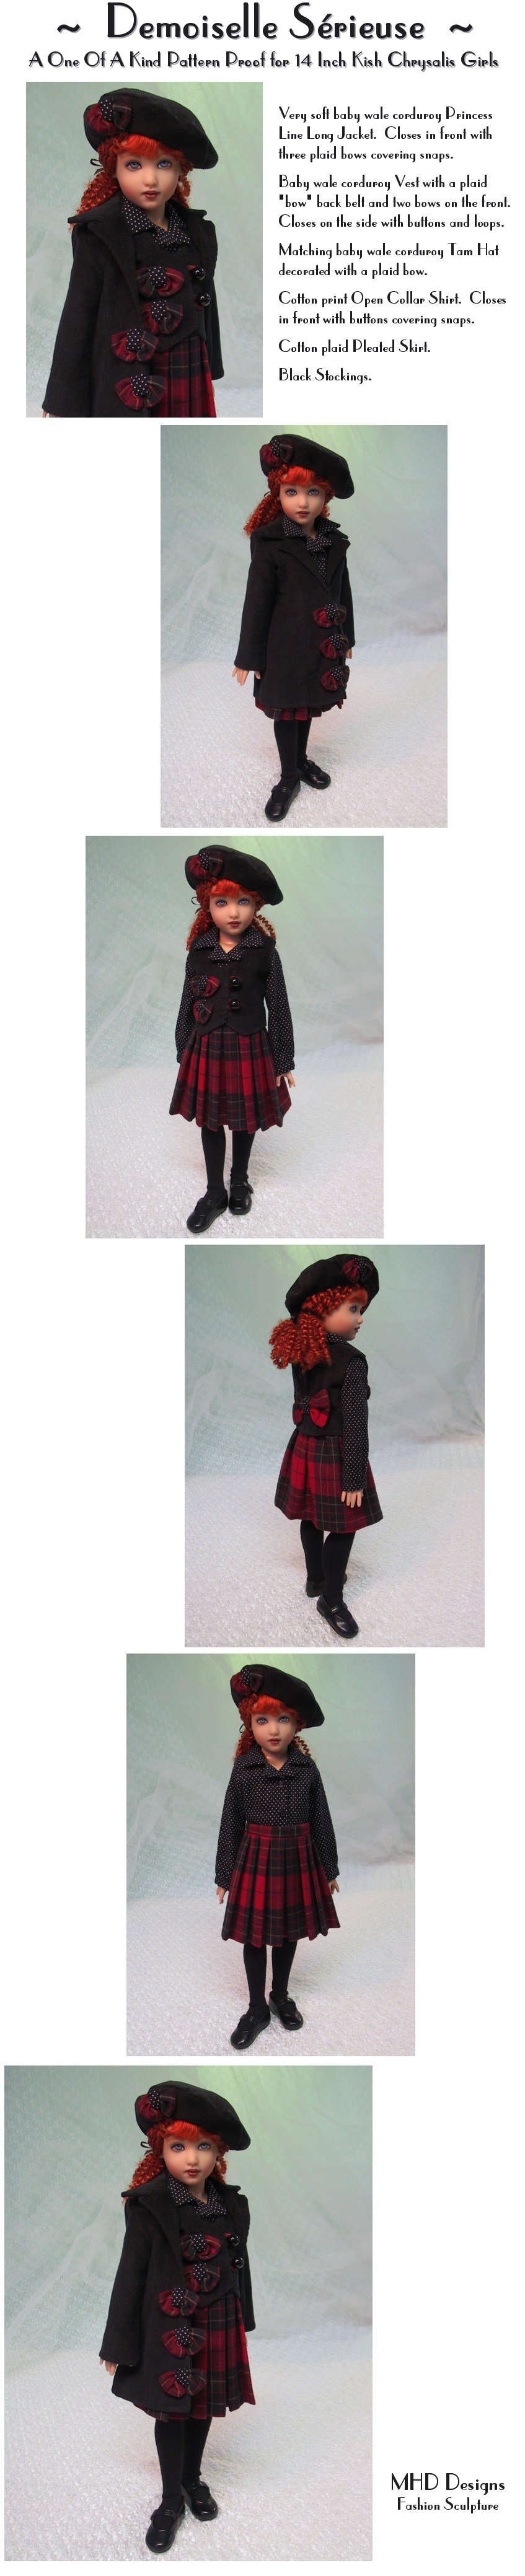 Serious Little Woman - a One Of A Kind Pattern Proof by MHD Designs - High Resolution Photographs, your patience is appreciated!